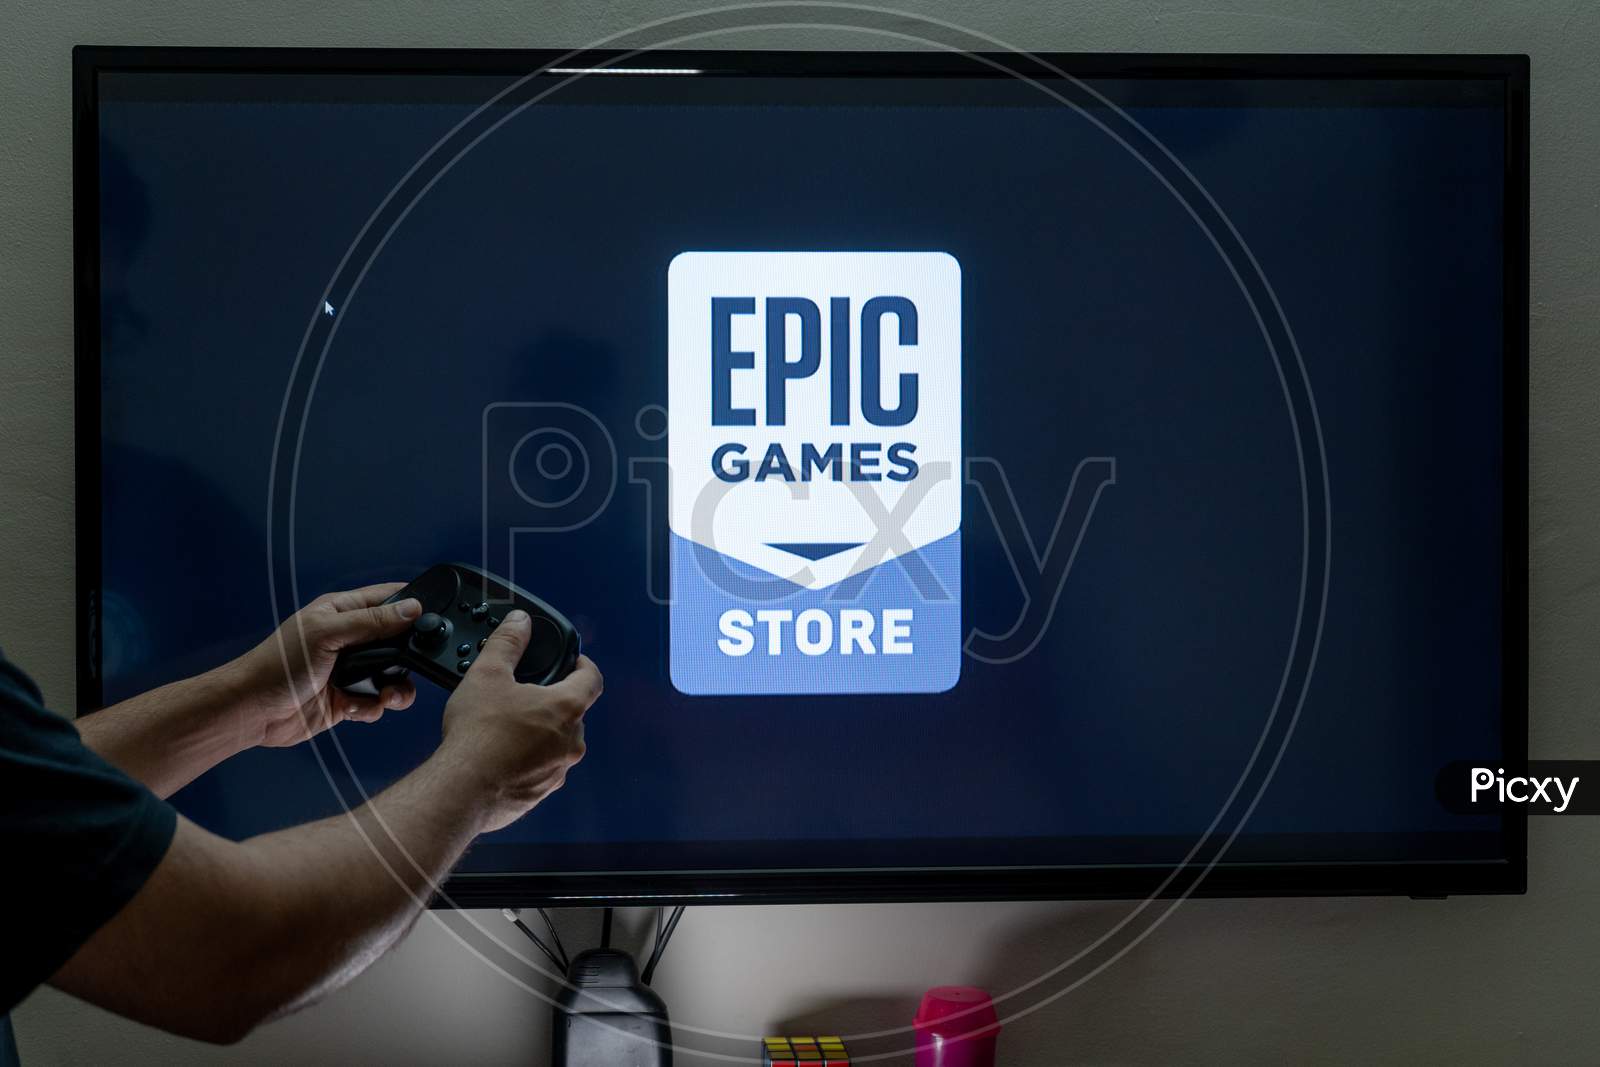 Man Holding Steam Controller Waiting For The Epic Game Store To Load An E-Store Of Reputed Games Used In E-Sports